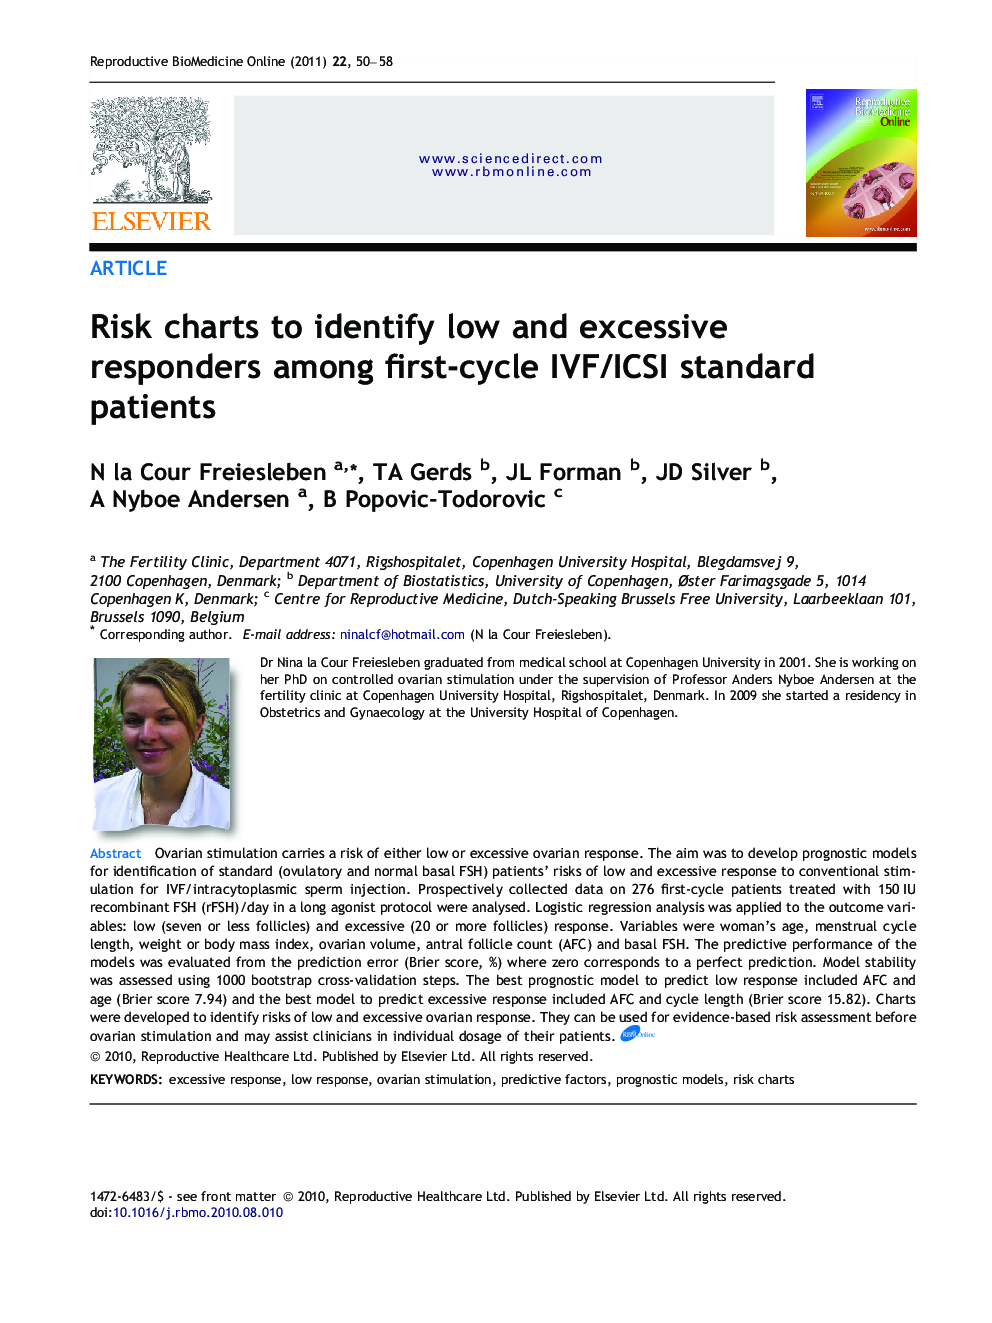 Risk charts to identify low and excessive responders among first-cycle IVF/ICSI standard patients 